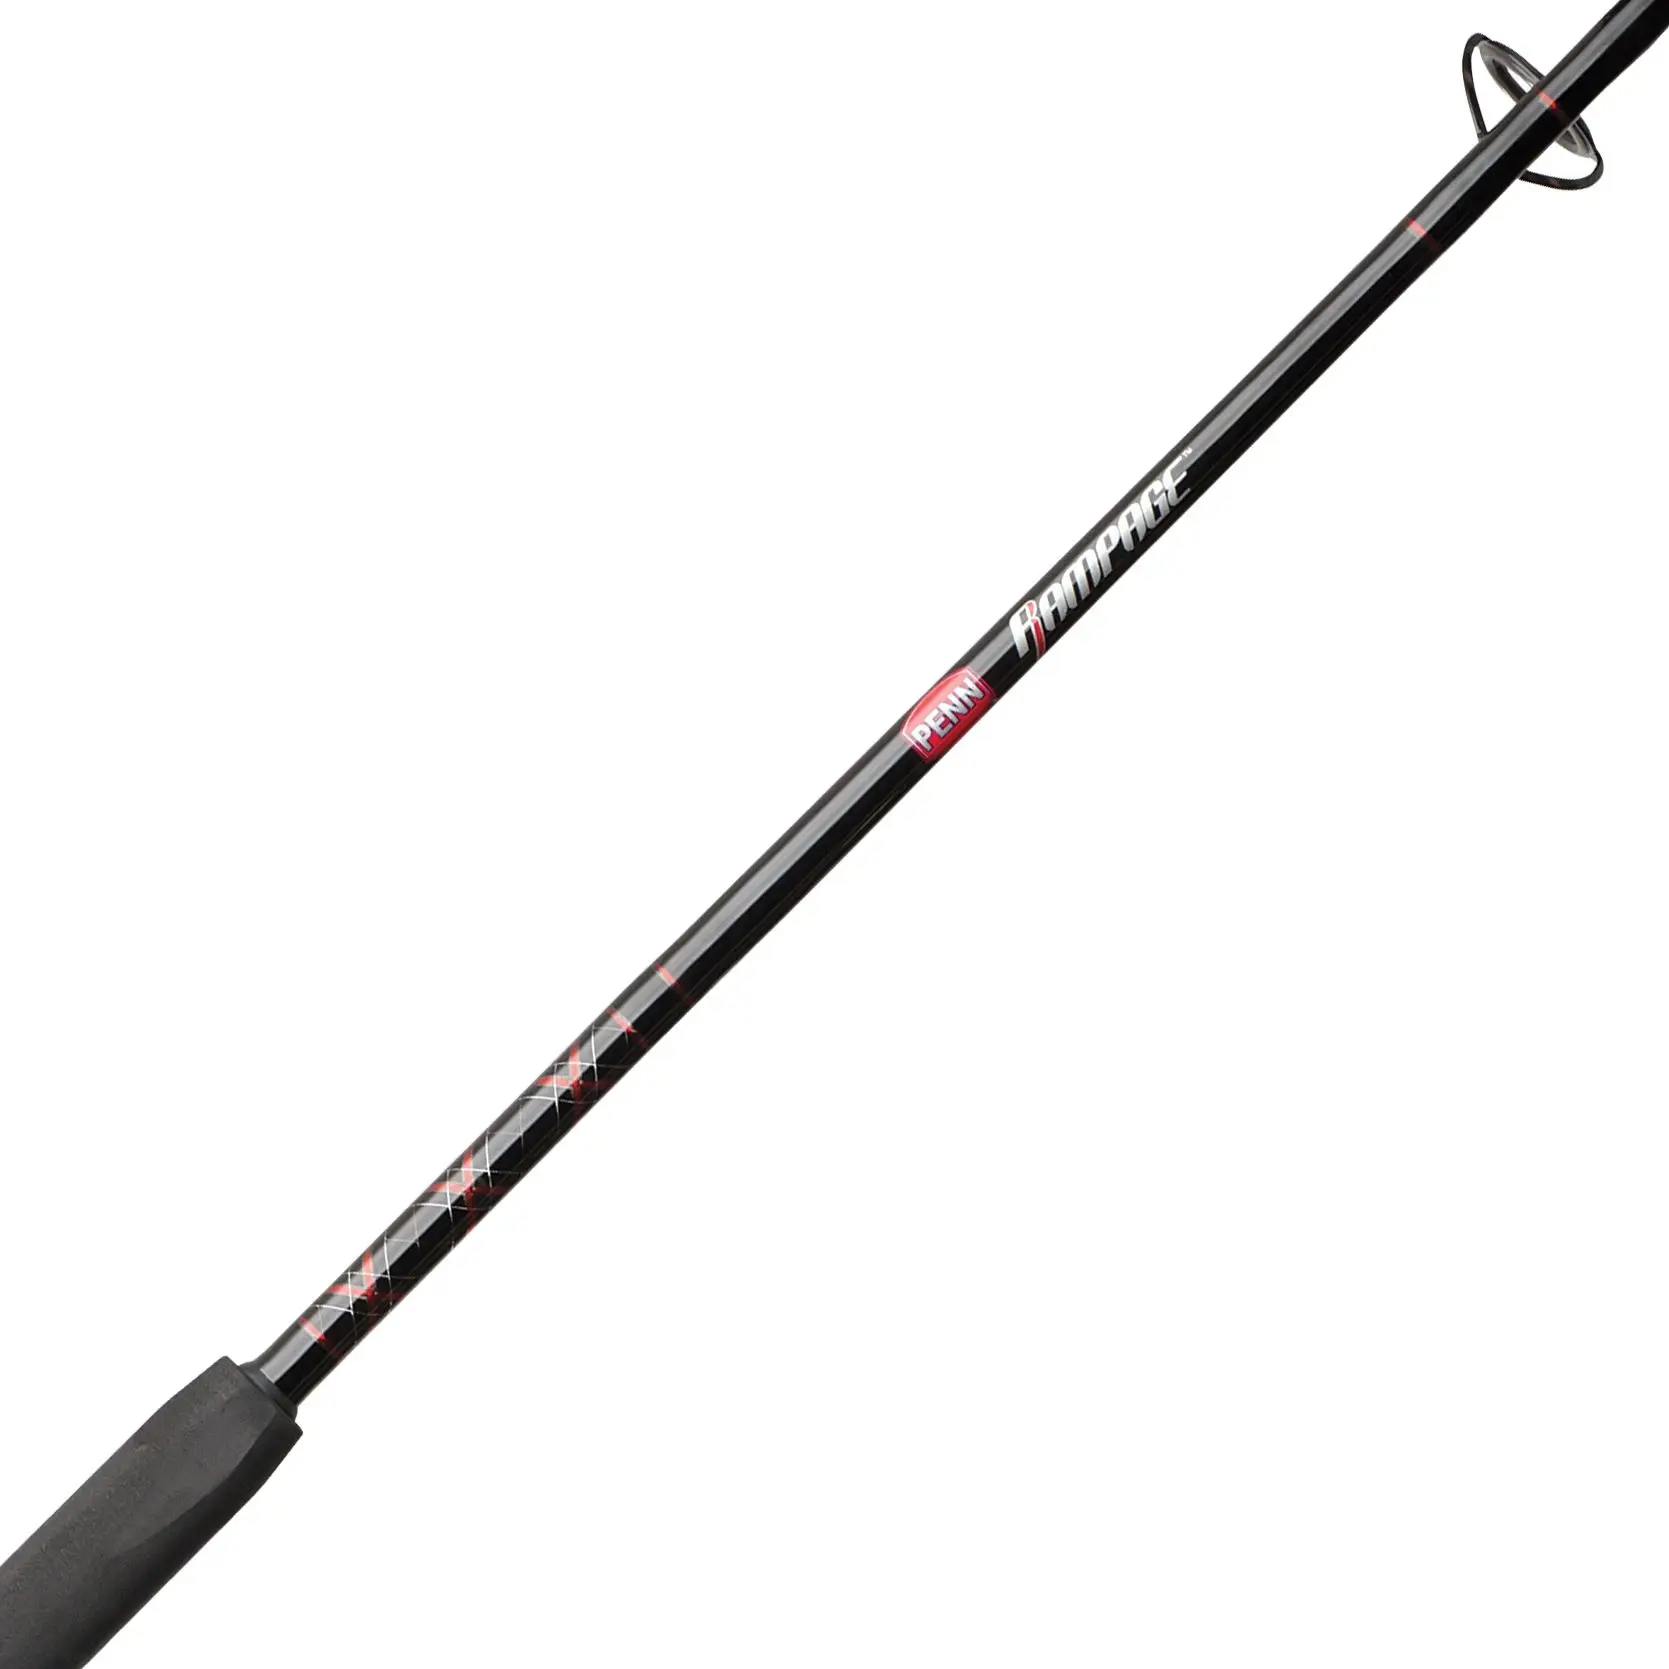 Rampage 7’. Nearshore/Offshore Boat Spinning Fishing Rod enlarge